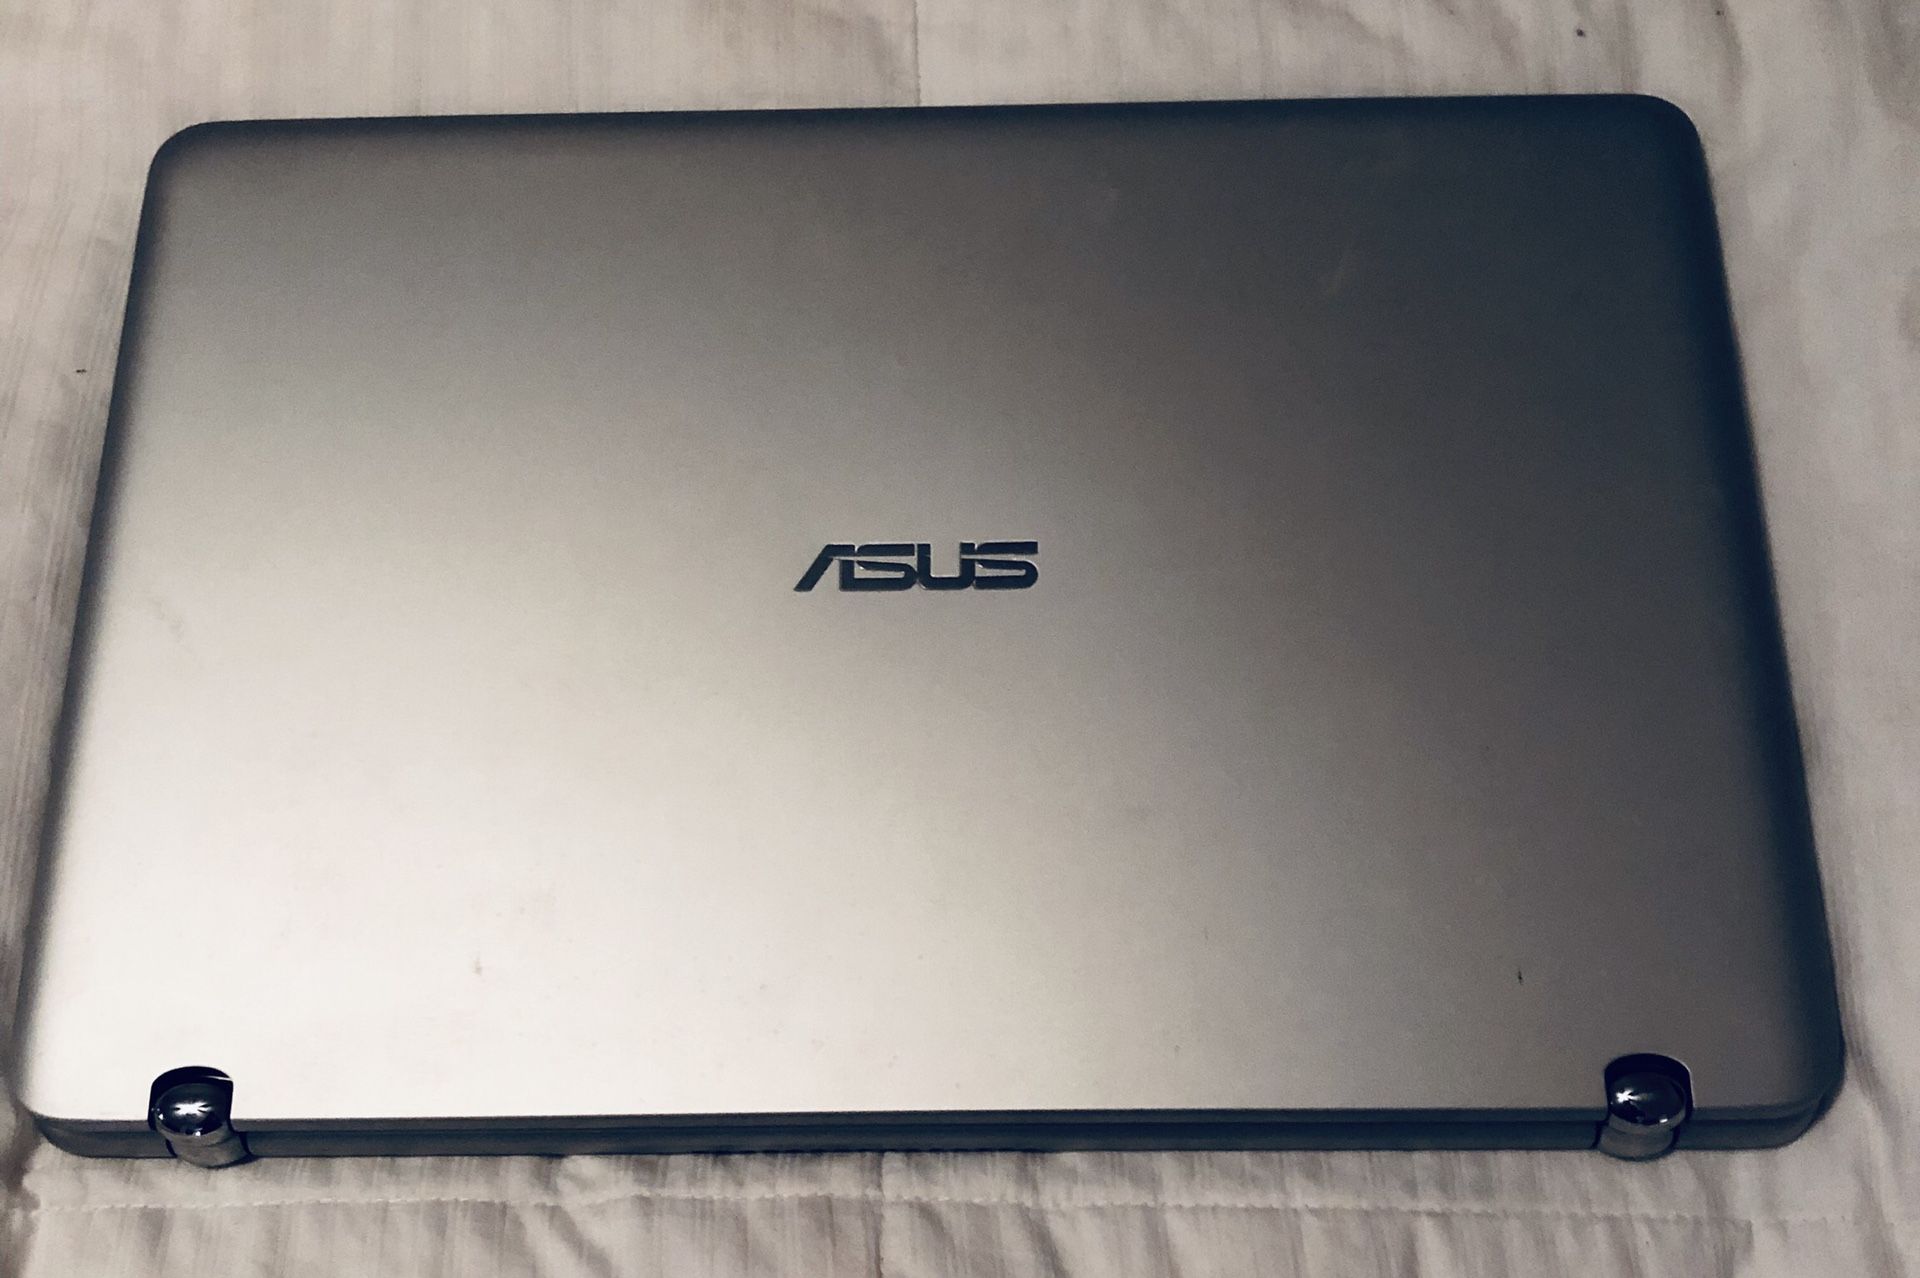 Asus. i5 intel processor, 1 tb memory, touch screen, 2 in 1, 15.6 inch convertible